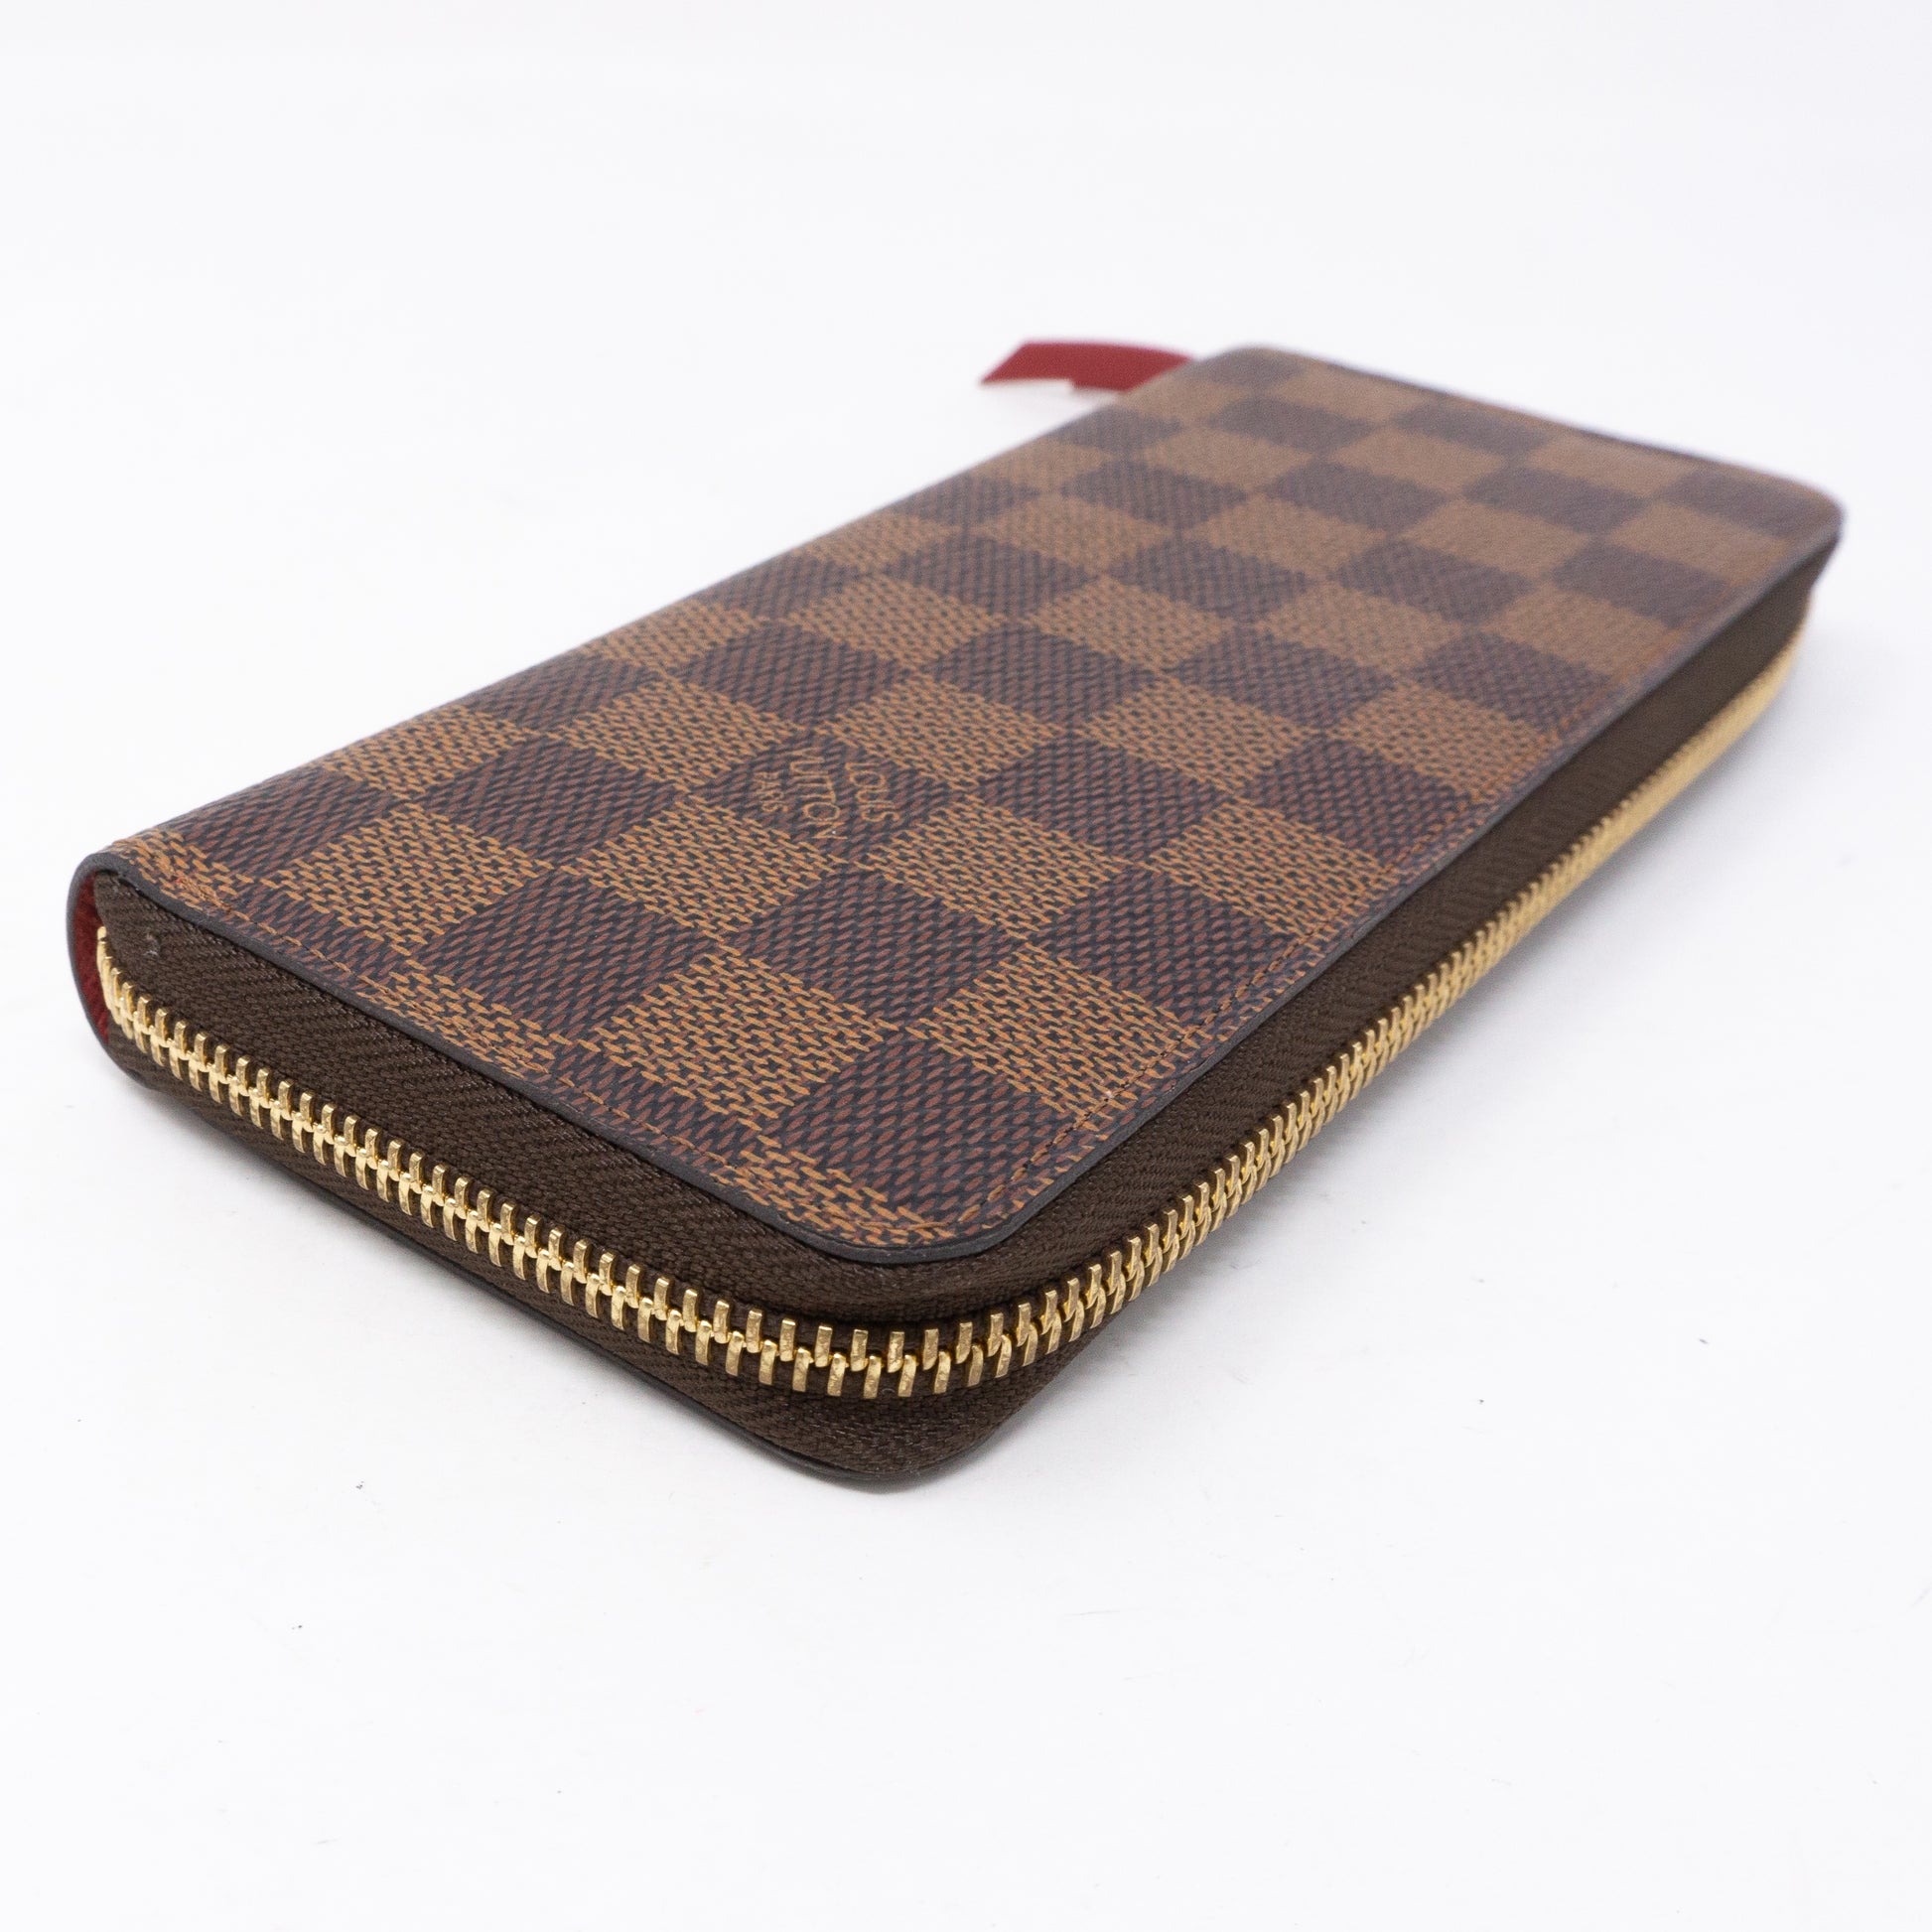 Louis Vuitton Damier Ebene Clemence Wallet. Red Interior. Made in France.  DC: SF4129